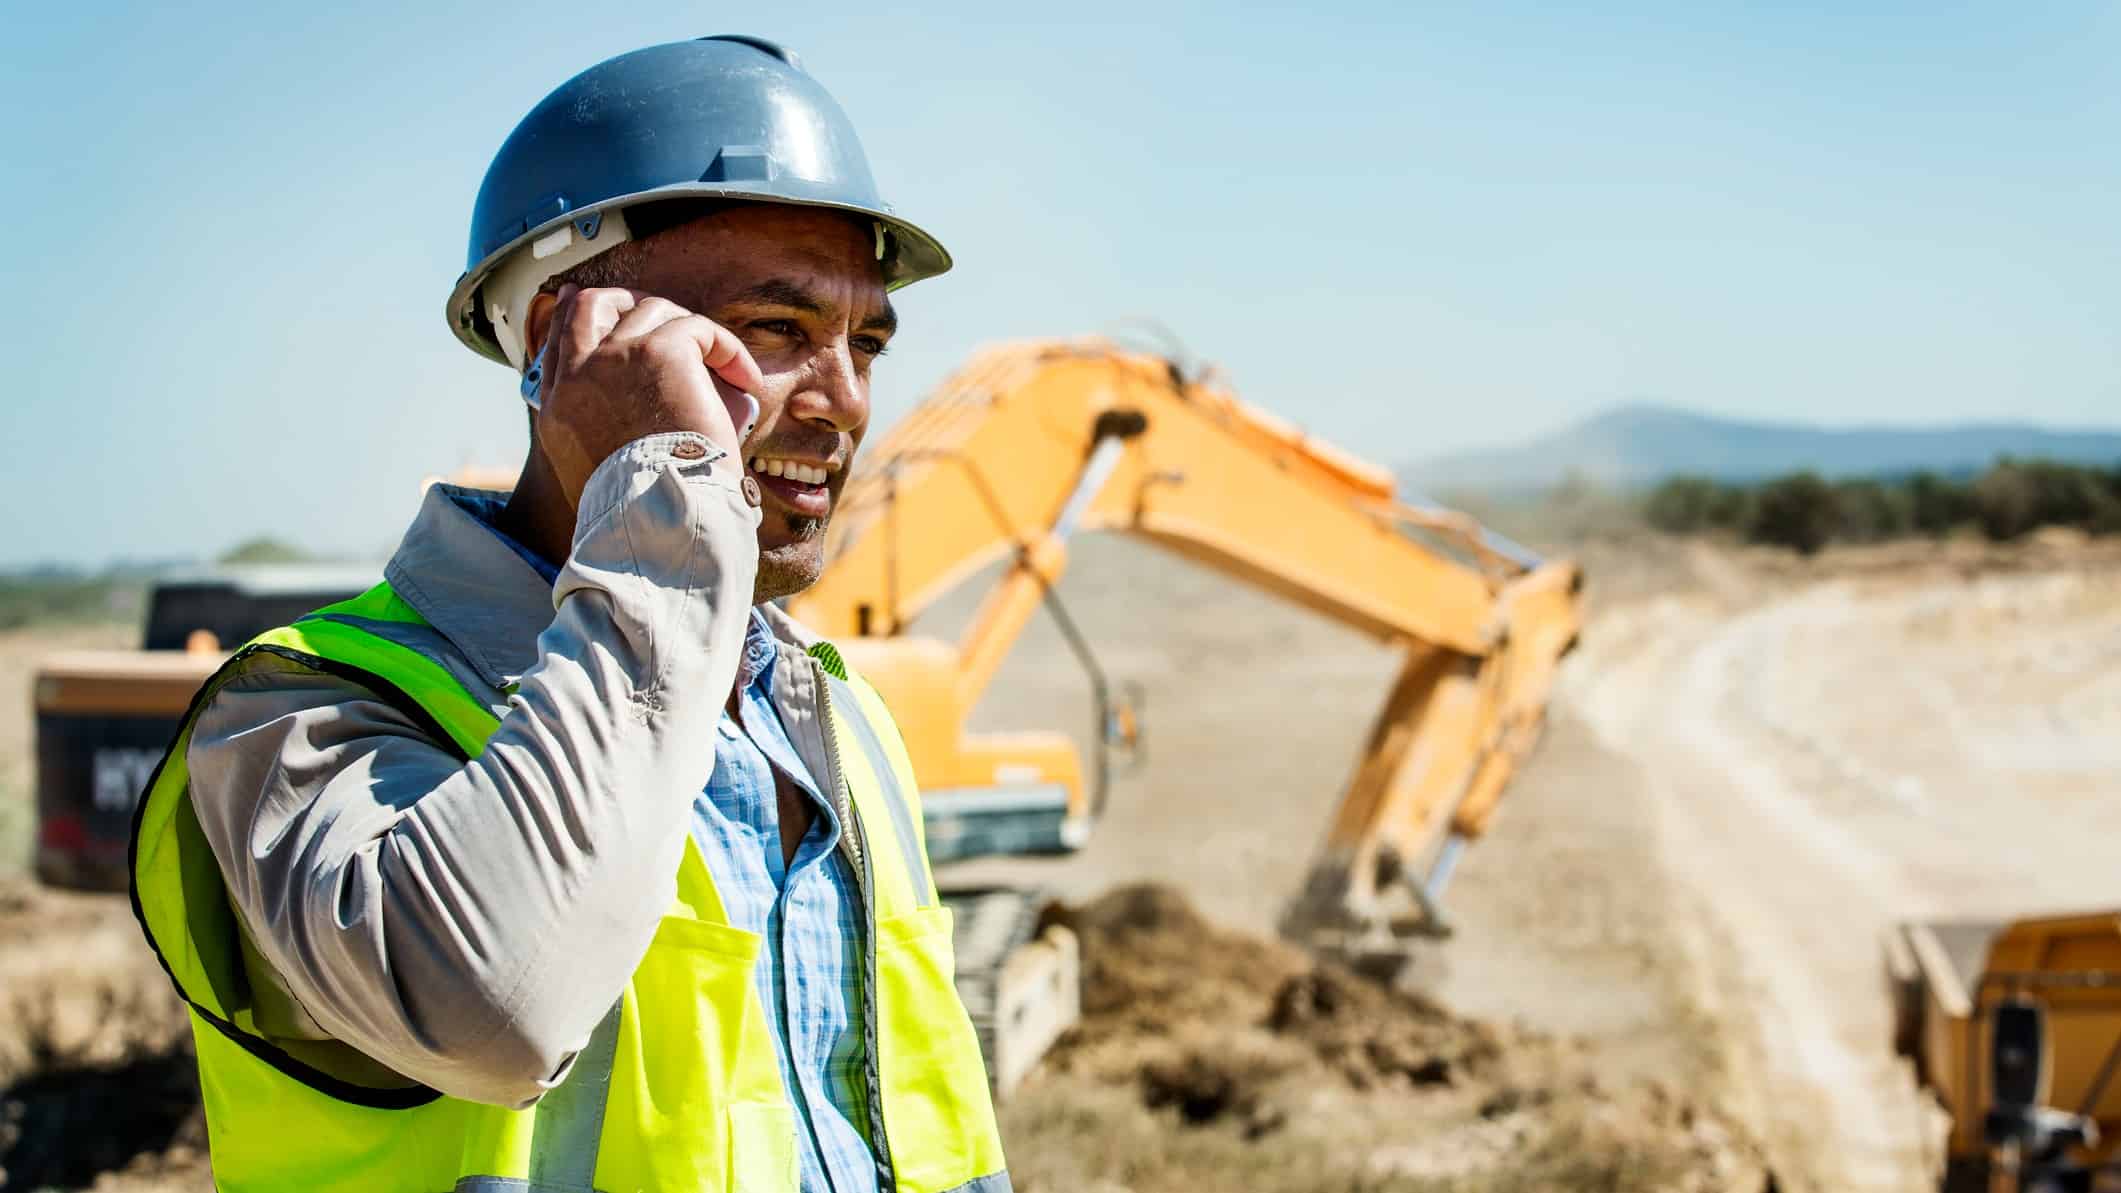 a man in hard hat and high visibility vest speaks on his mobile phone in front of a digging machine with a heavy dump truck vehicle also visible in the background.